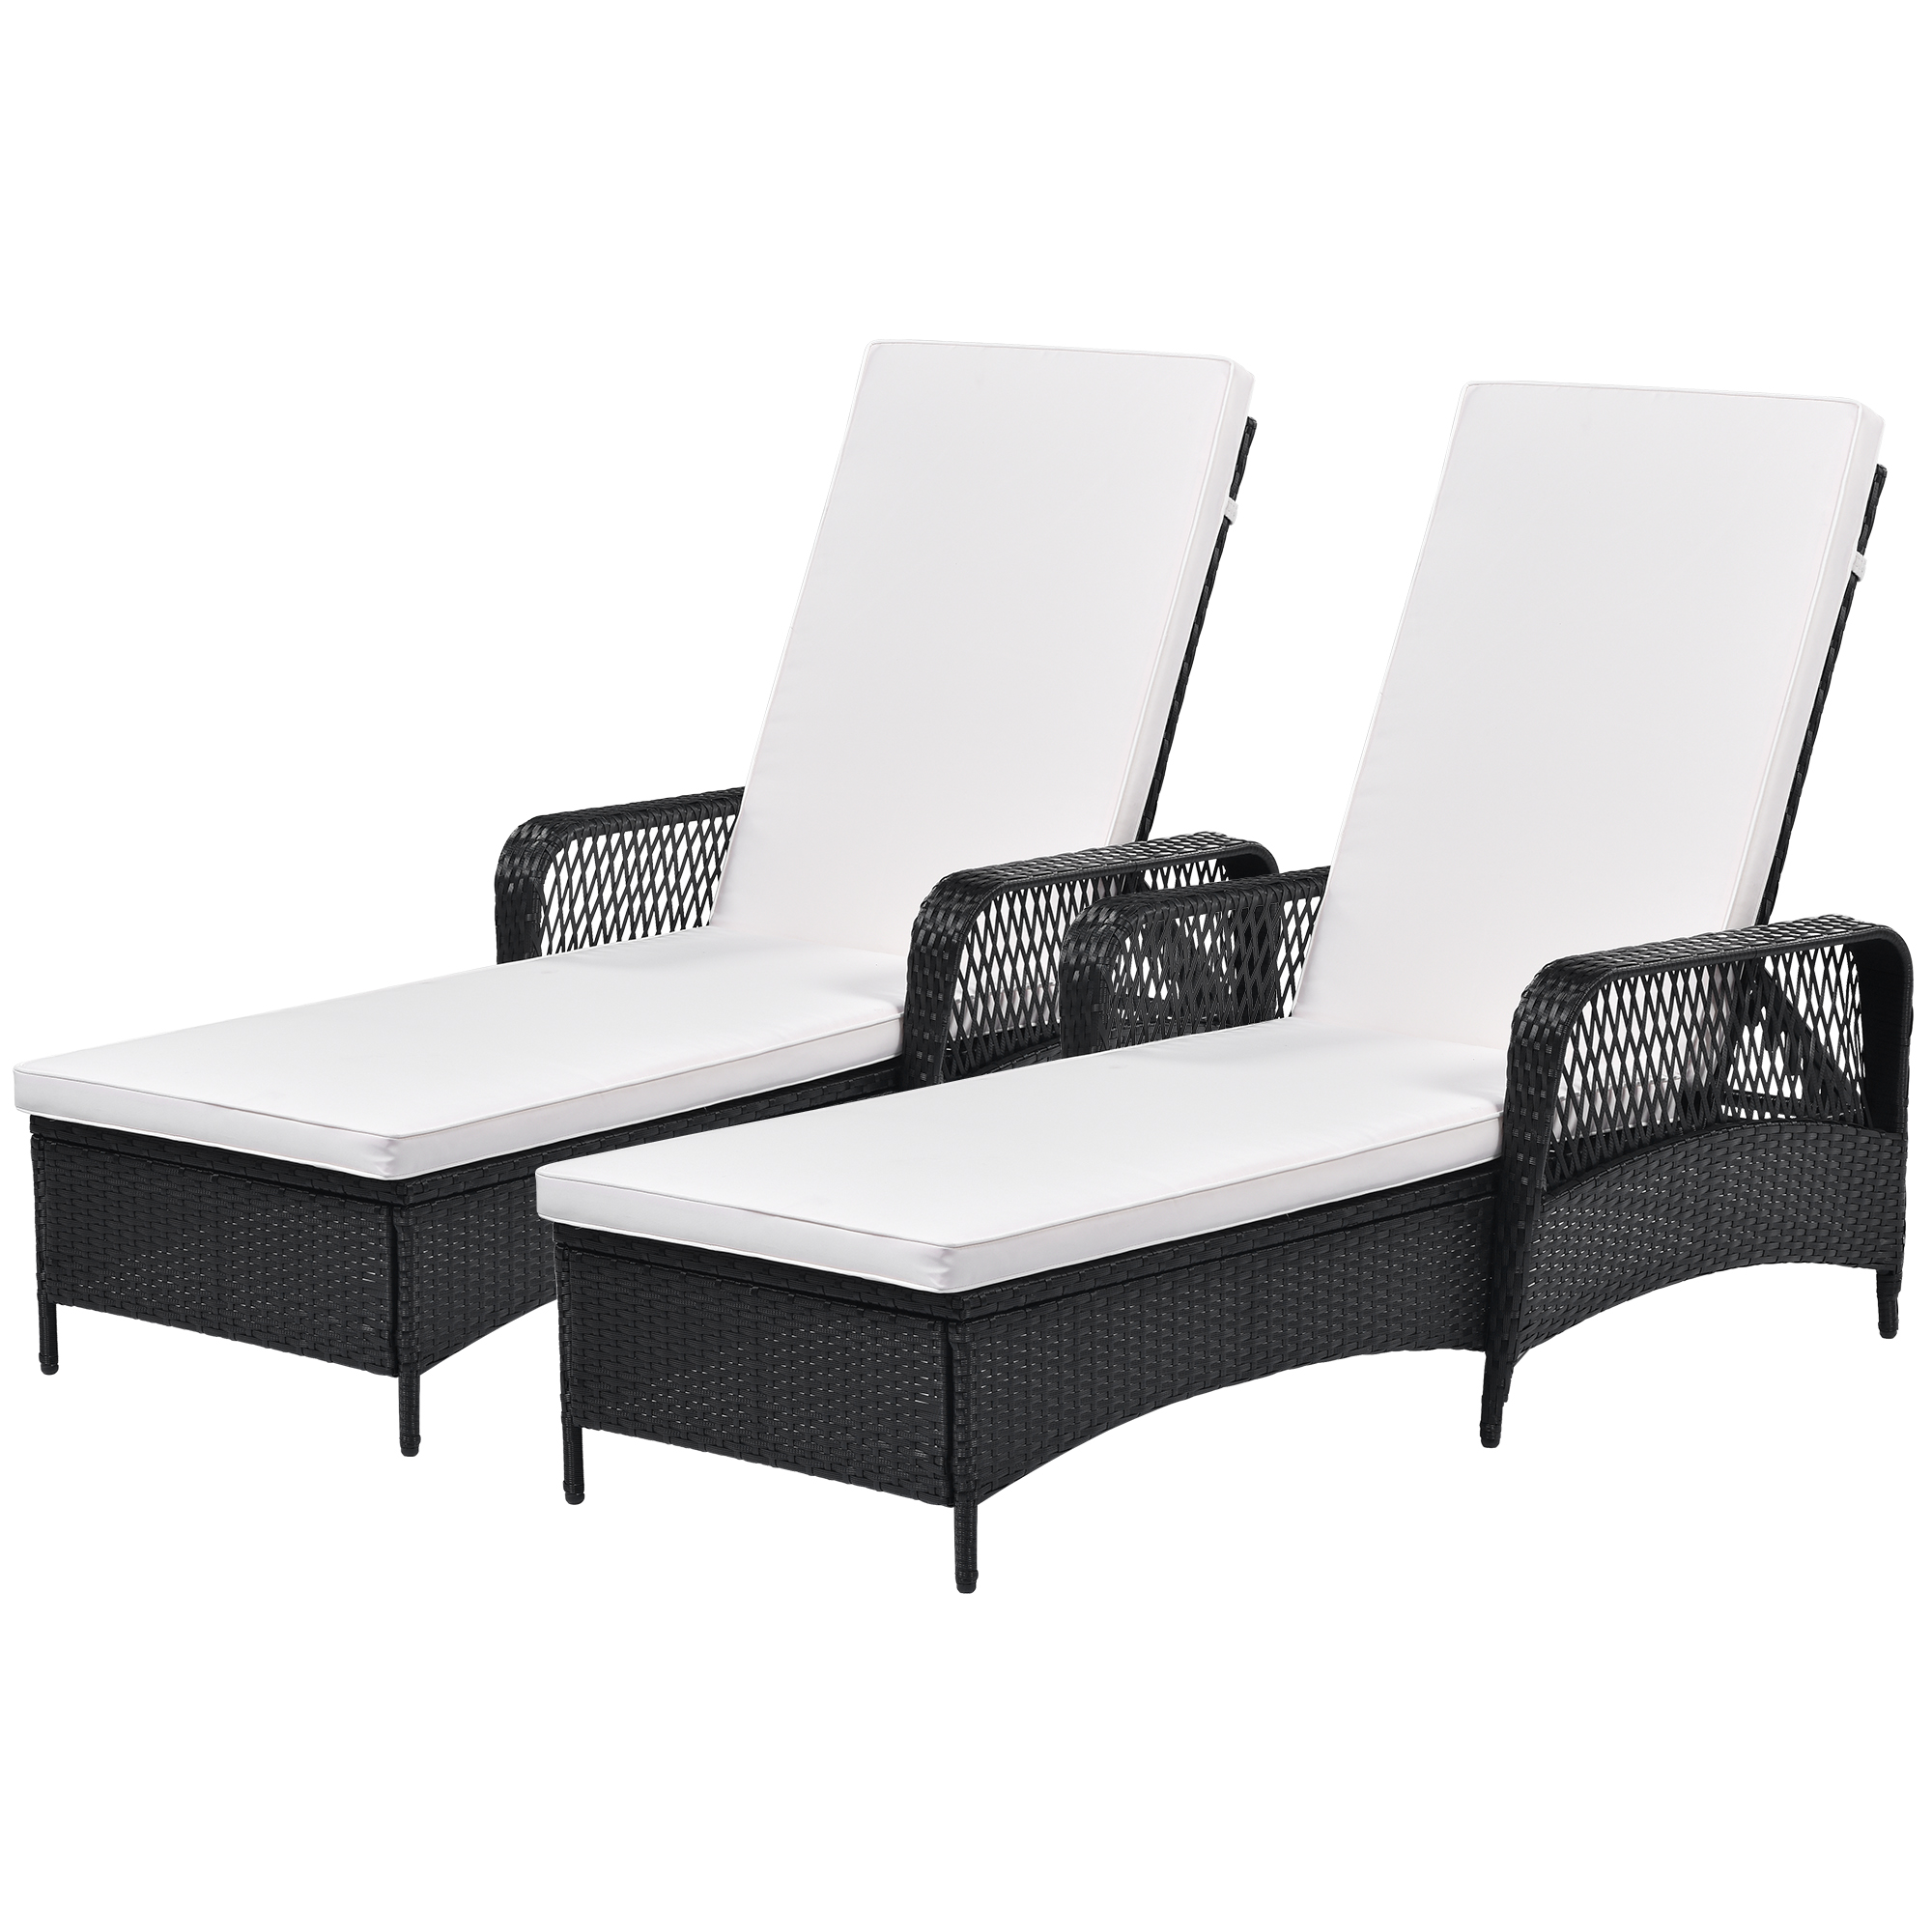 Canddidliike Adjustable Reclining Patio Chairs w/Armrest, Water Resistant Beige Cushions, 2-Pcs Set - image 2 of 10